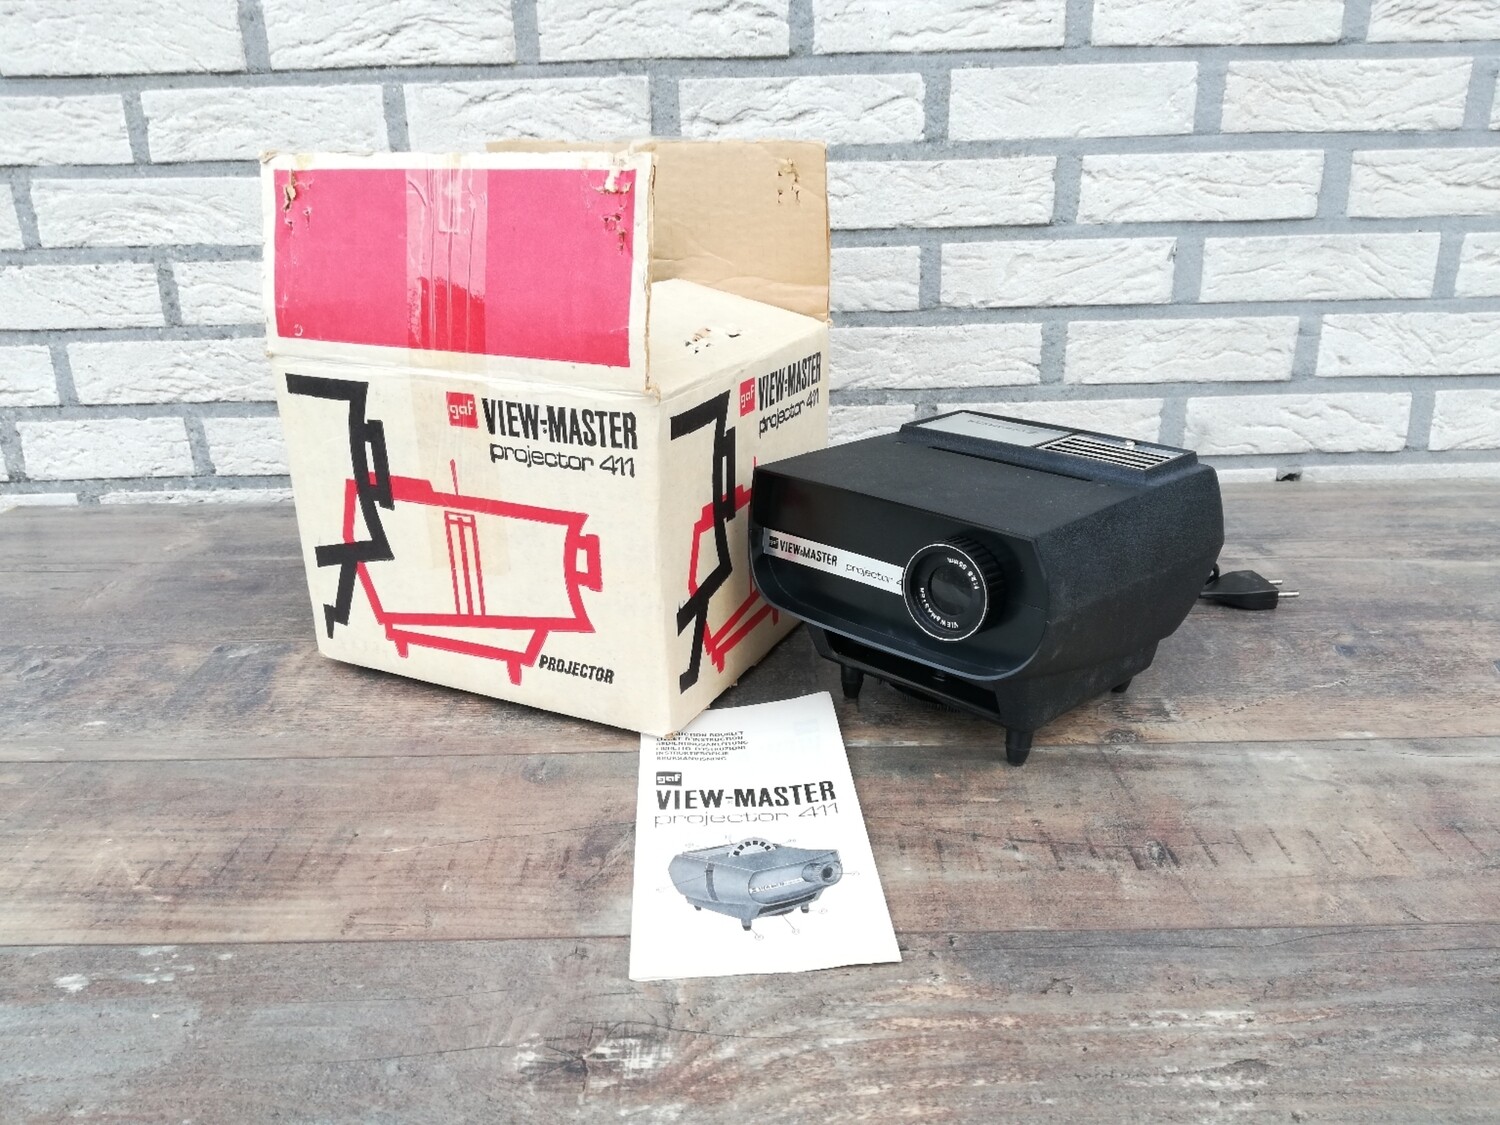 View-Master projector 411